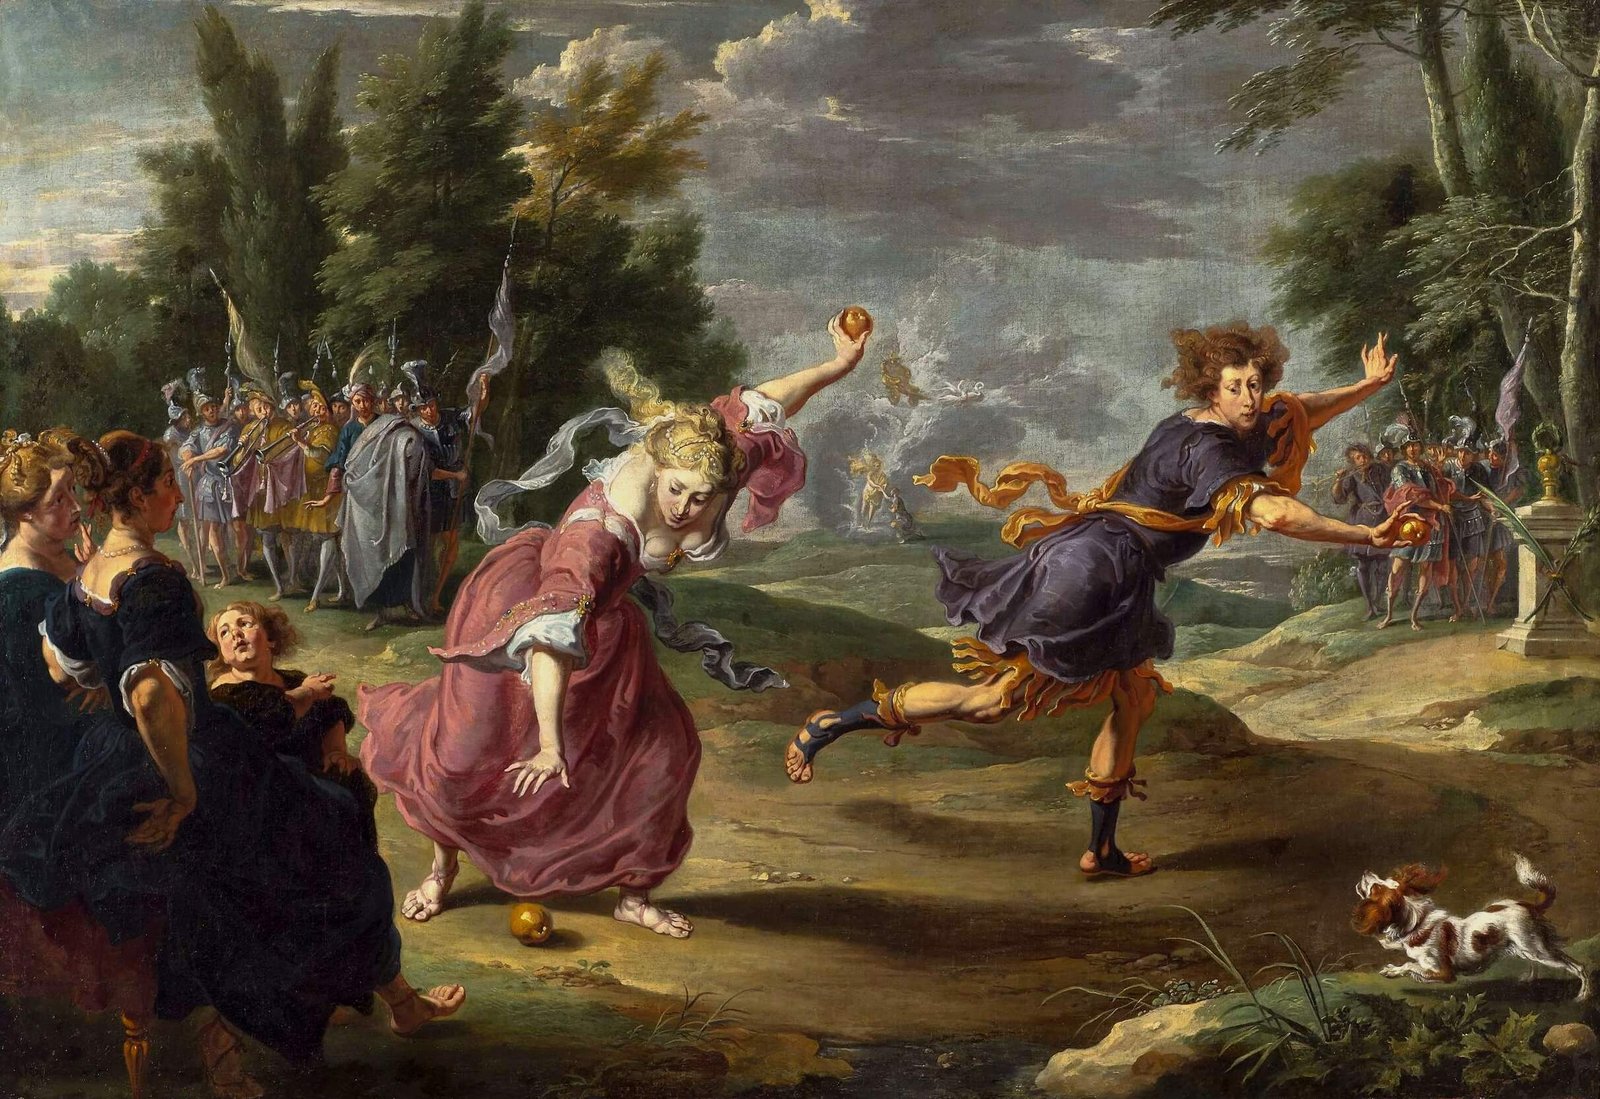 This painting represents Hippomenes throwing the golden apples to distract Atalanta. It looks like a painting depicting a scene from 17th century.